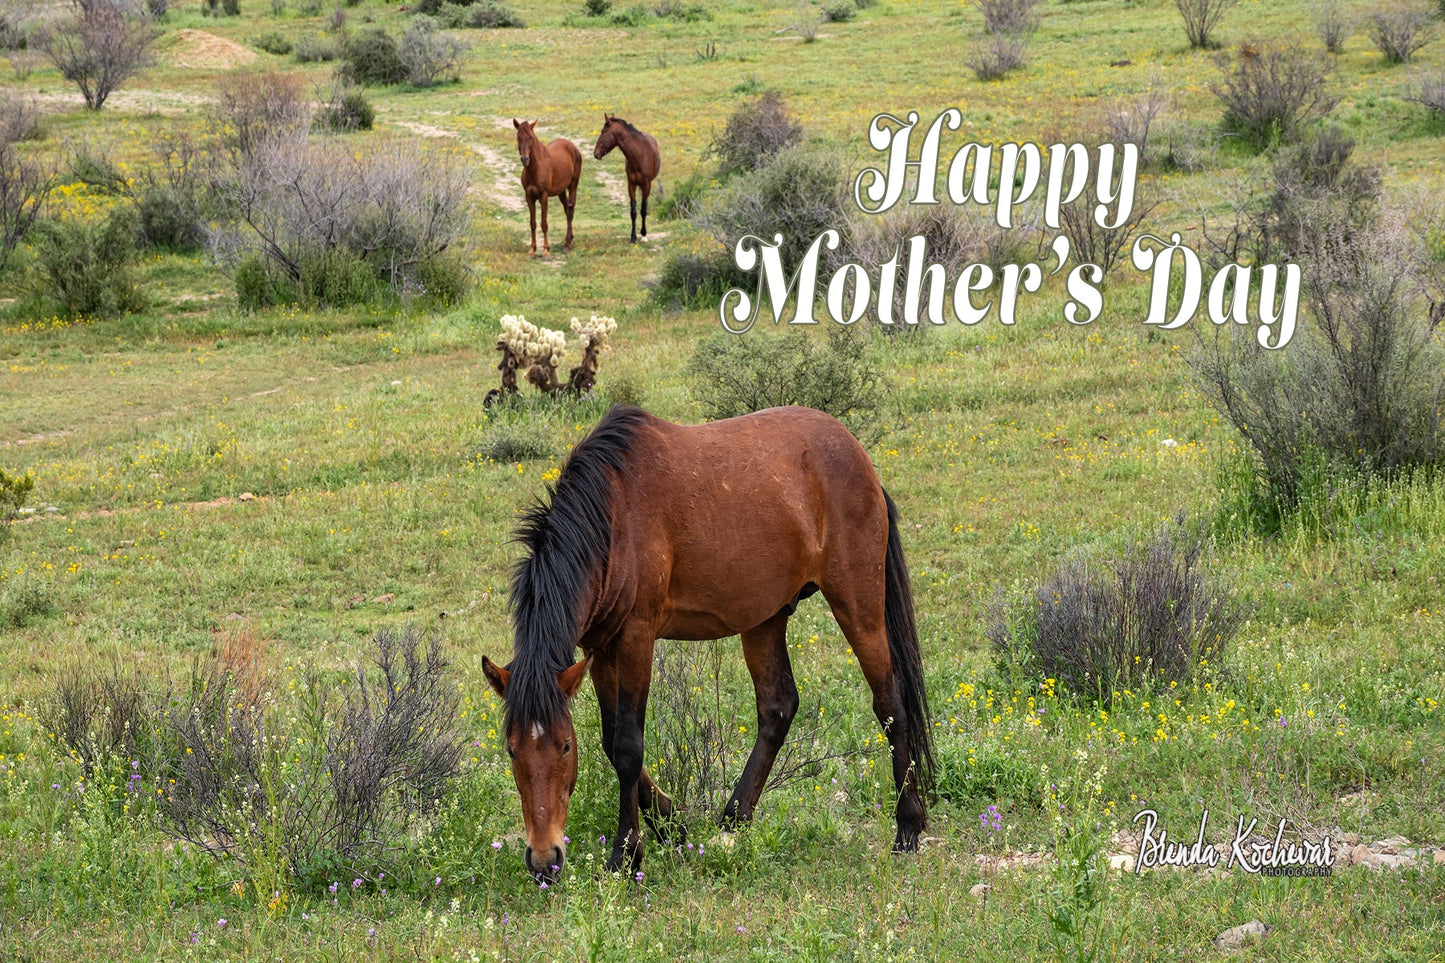 Salt River Wild Horse Friends Mother's Day Greeting Card & Necklace Set